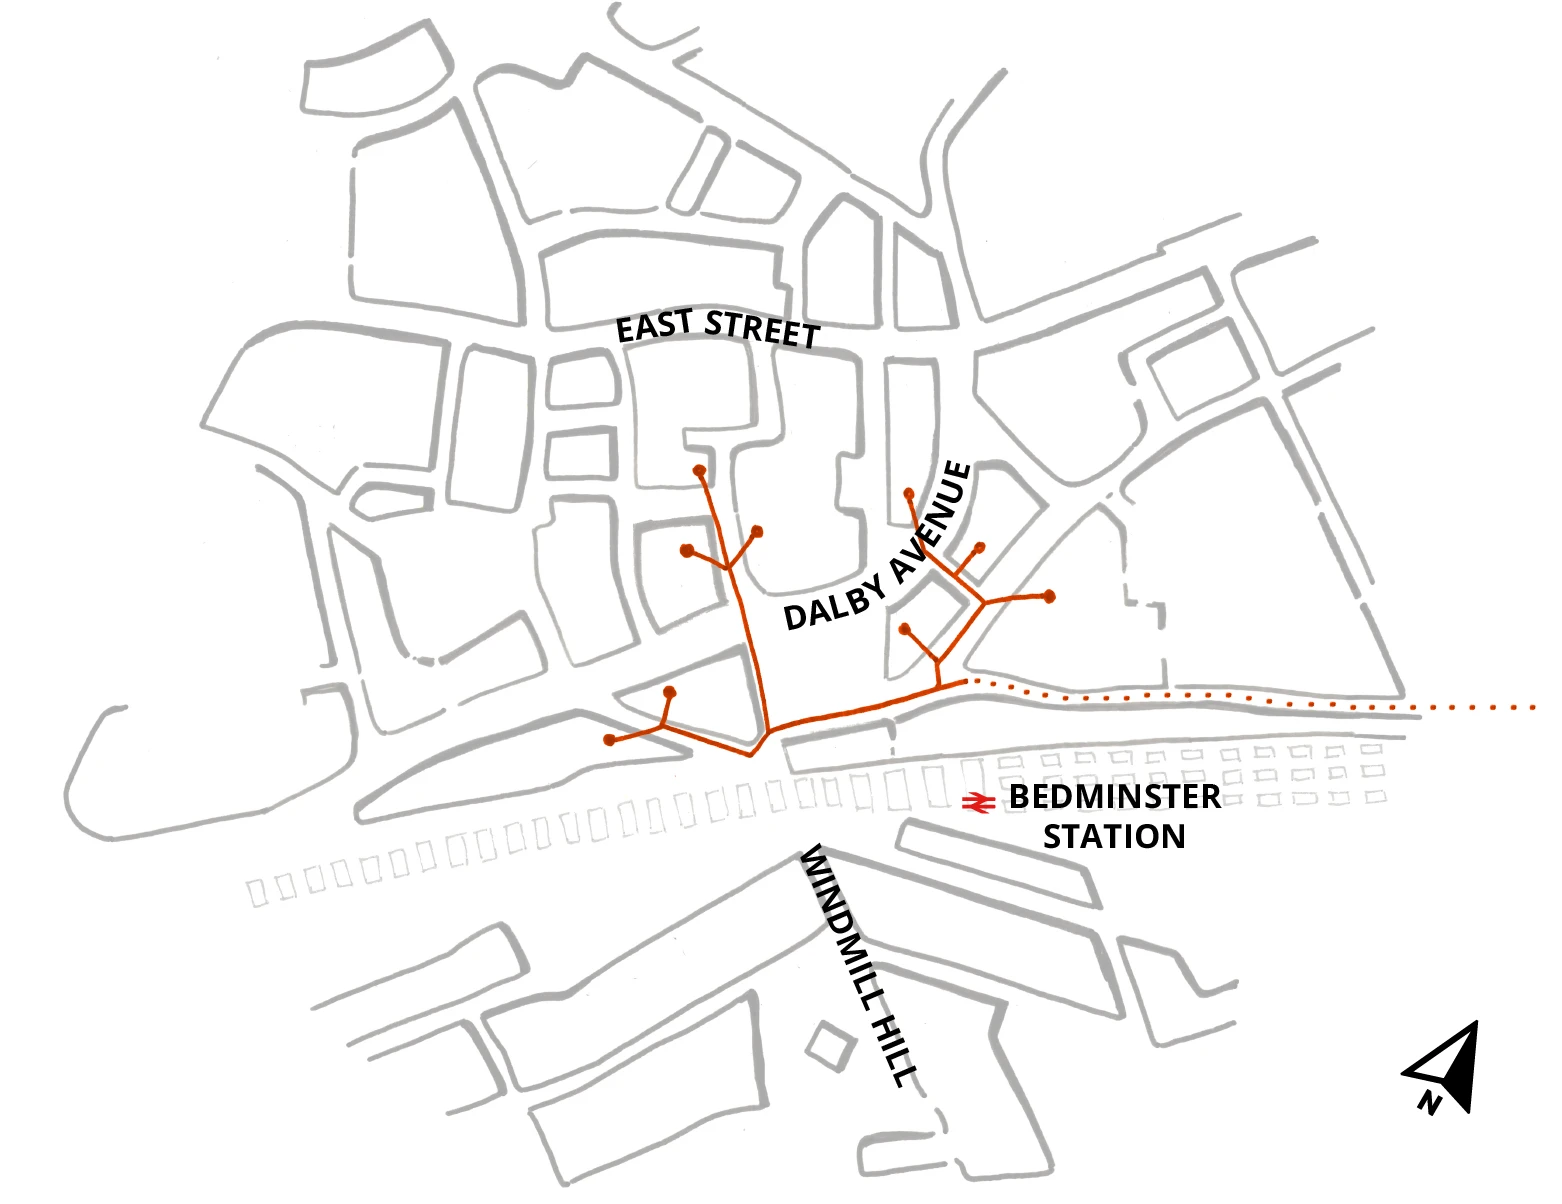 The base of this diagram, which is the same for all the framework diagrams, is a hand drawing showing the urban blocks of the wider Bedminster Green area – East Street is towards the top of the image, Dalby Avenue is in the middle, the railway and Bedminster station is below that and Windmill Hill is at the bottom. Orange lines run along roads around the central Green. A dashed orange line runs along Whitehouse Street off to the right of the diagram.